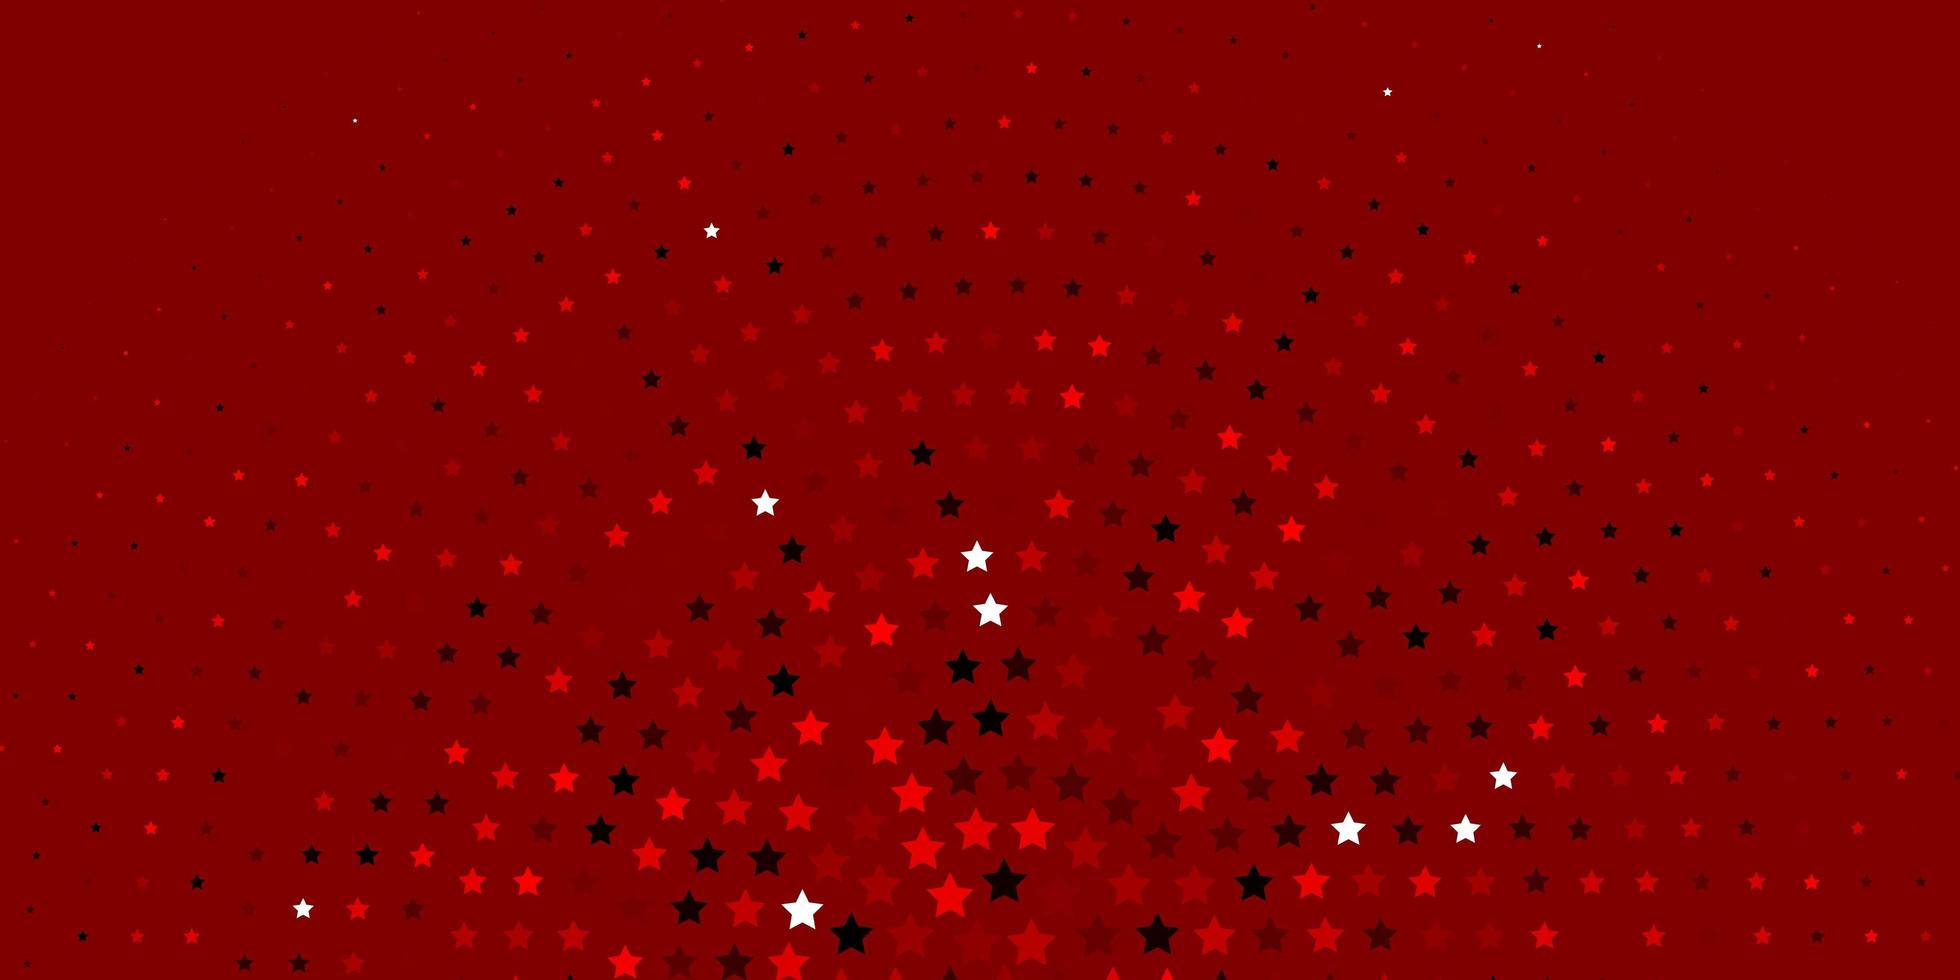 Light Red vector layout with bright stars. Decorative illustration with stars on abstract template. Pattern for websites, landing pages.